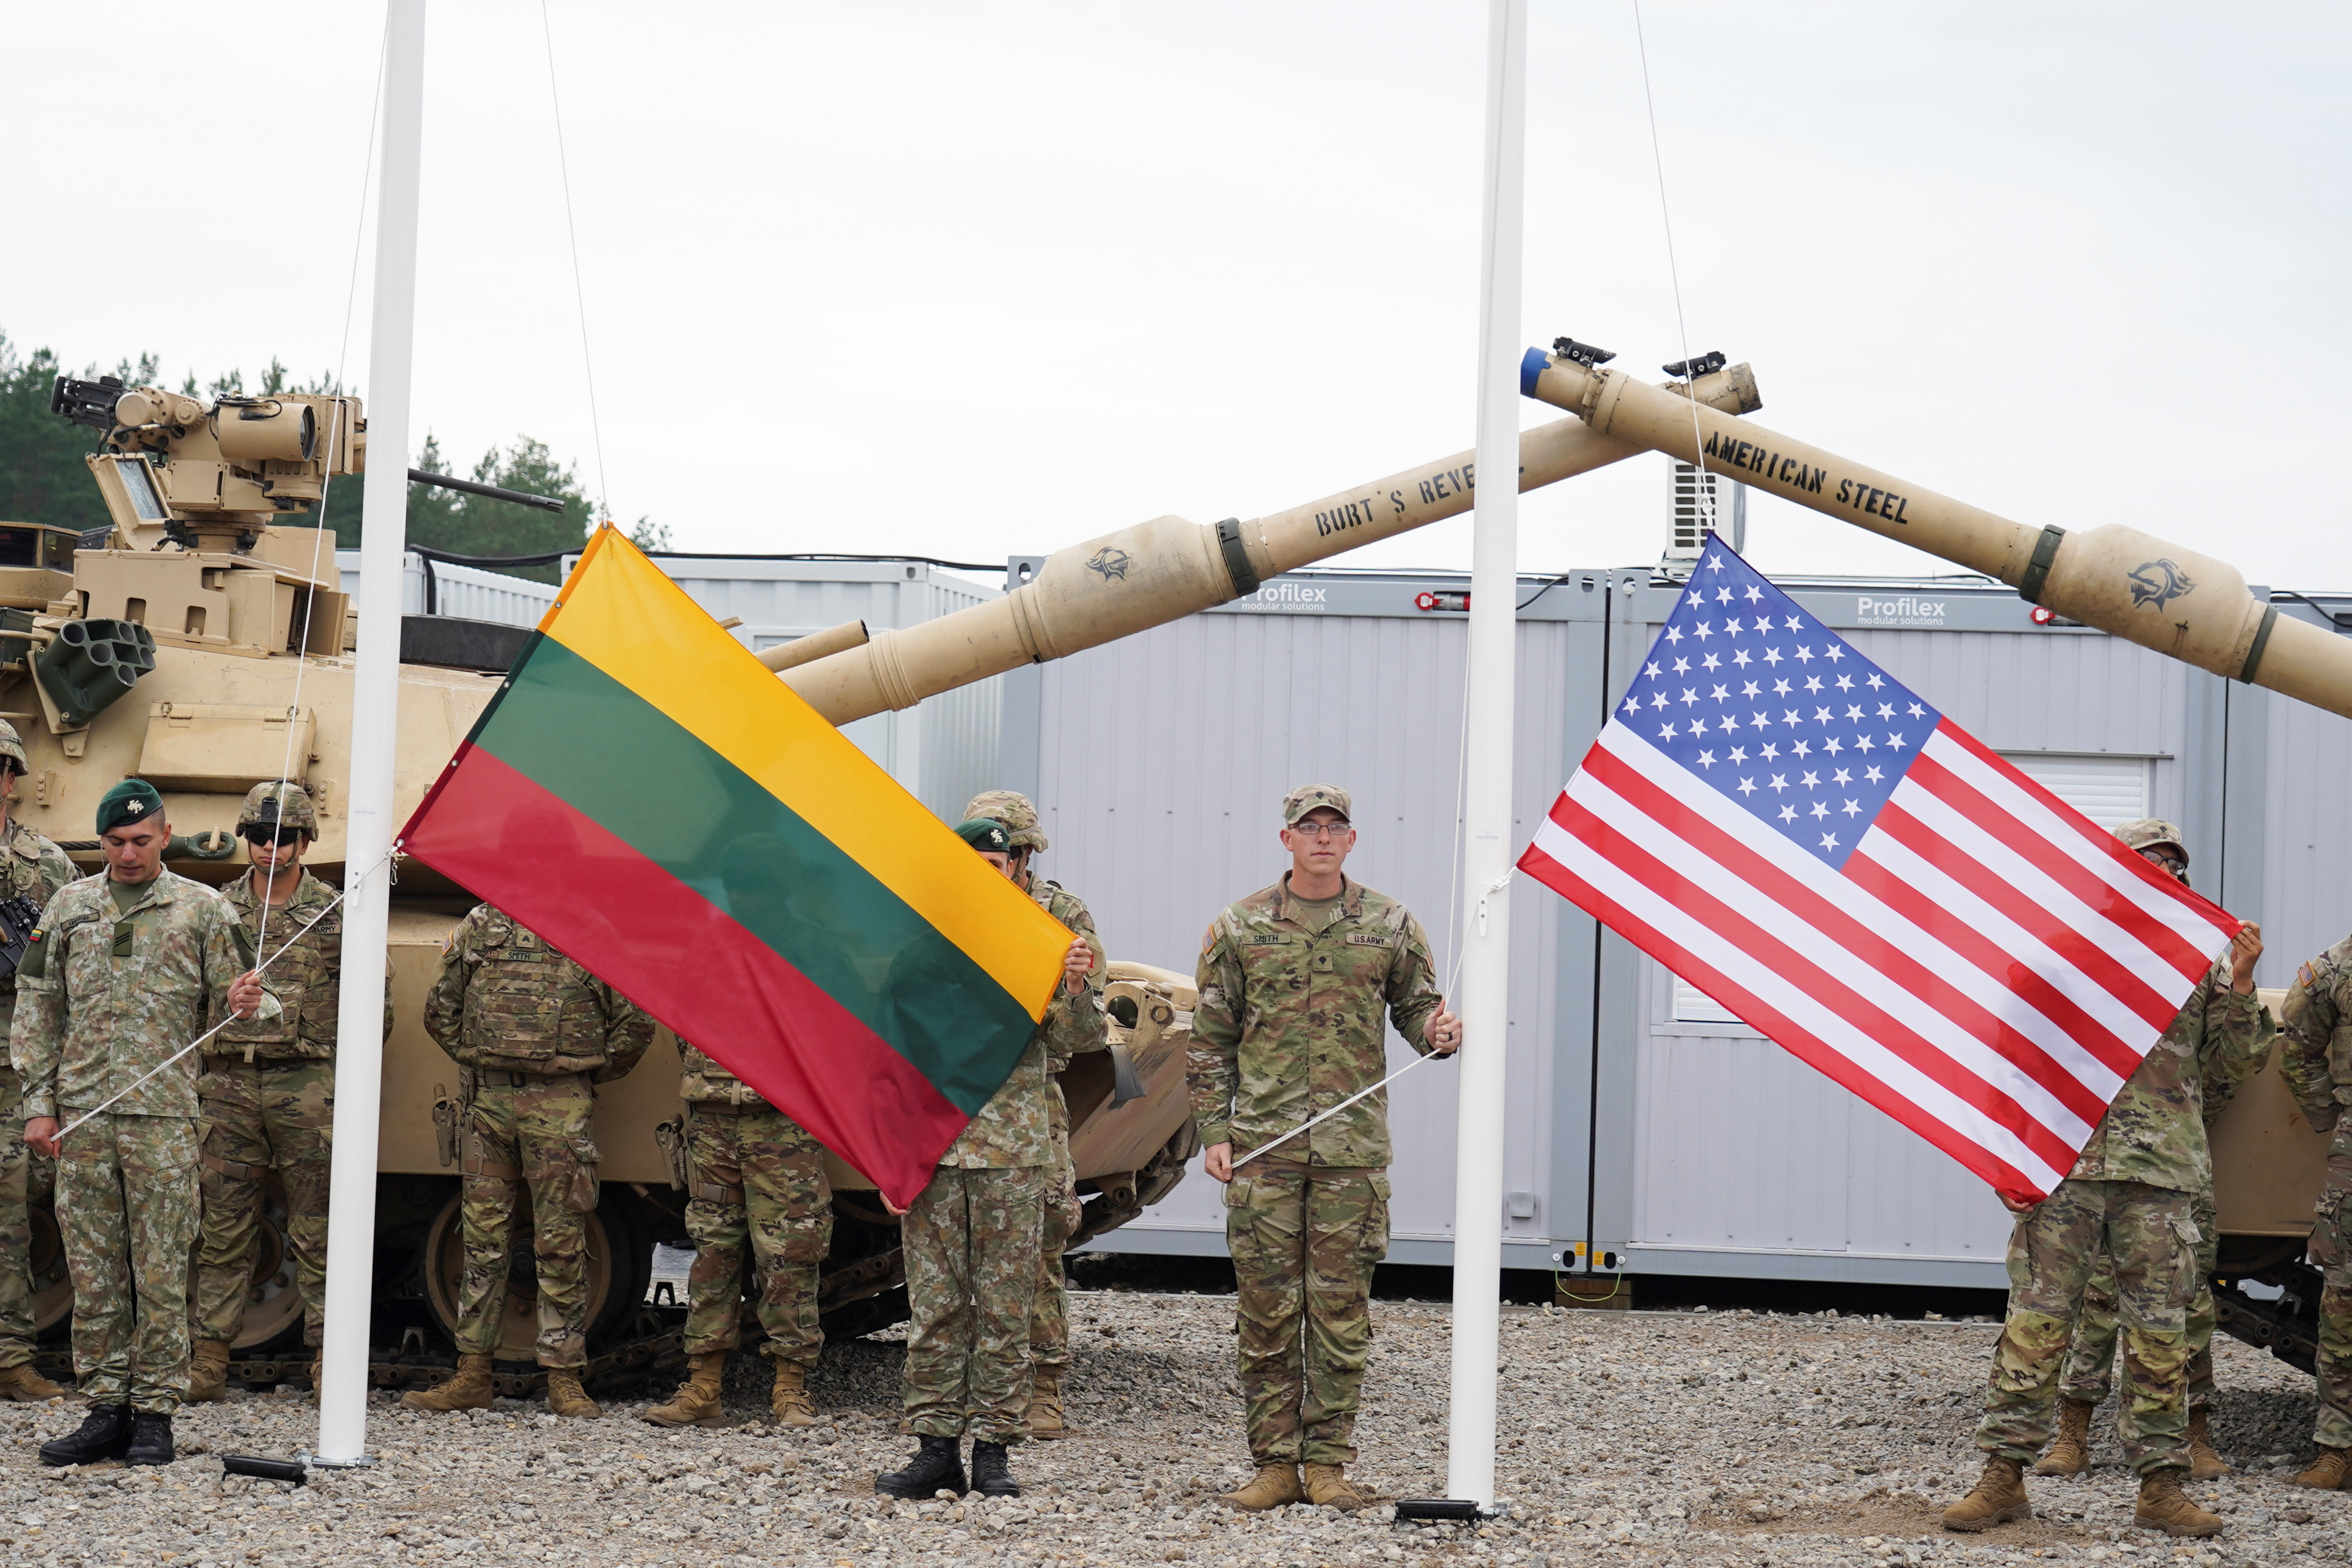 Lithuania launches a camp for the U.S. soldiers deployed on its soil